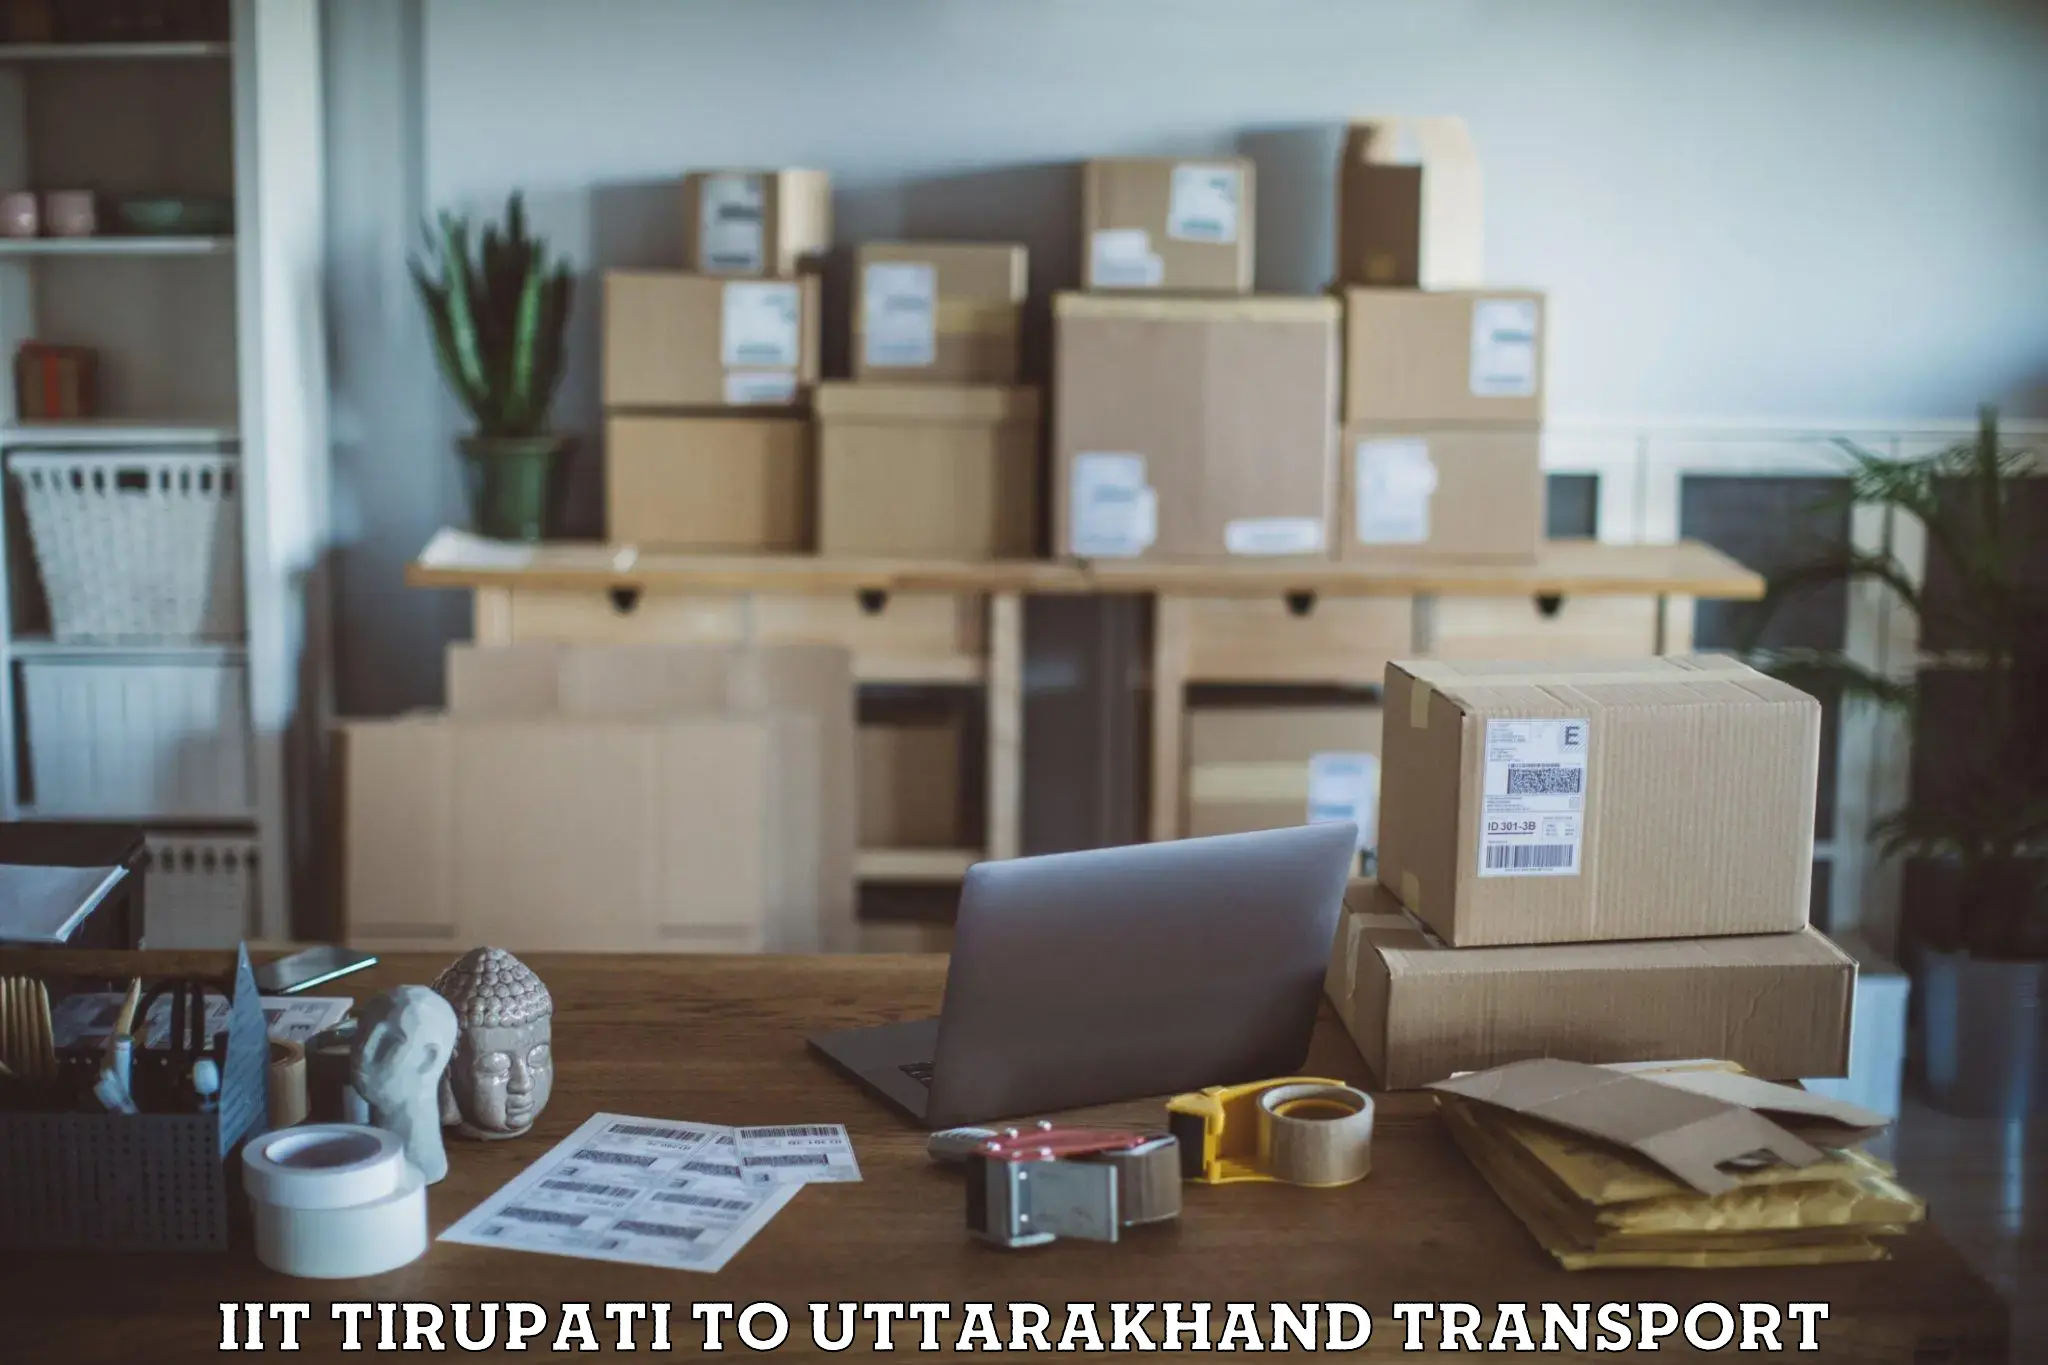 Container transport service IIT Tirupati to Champawat